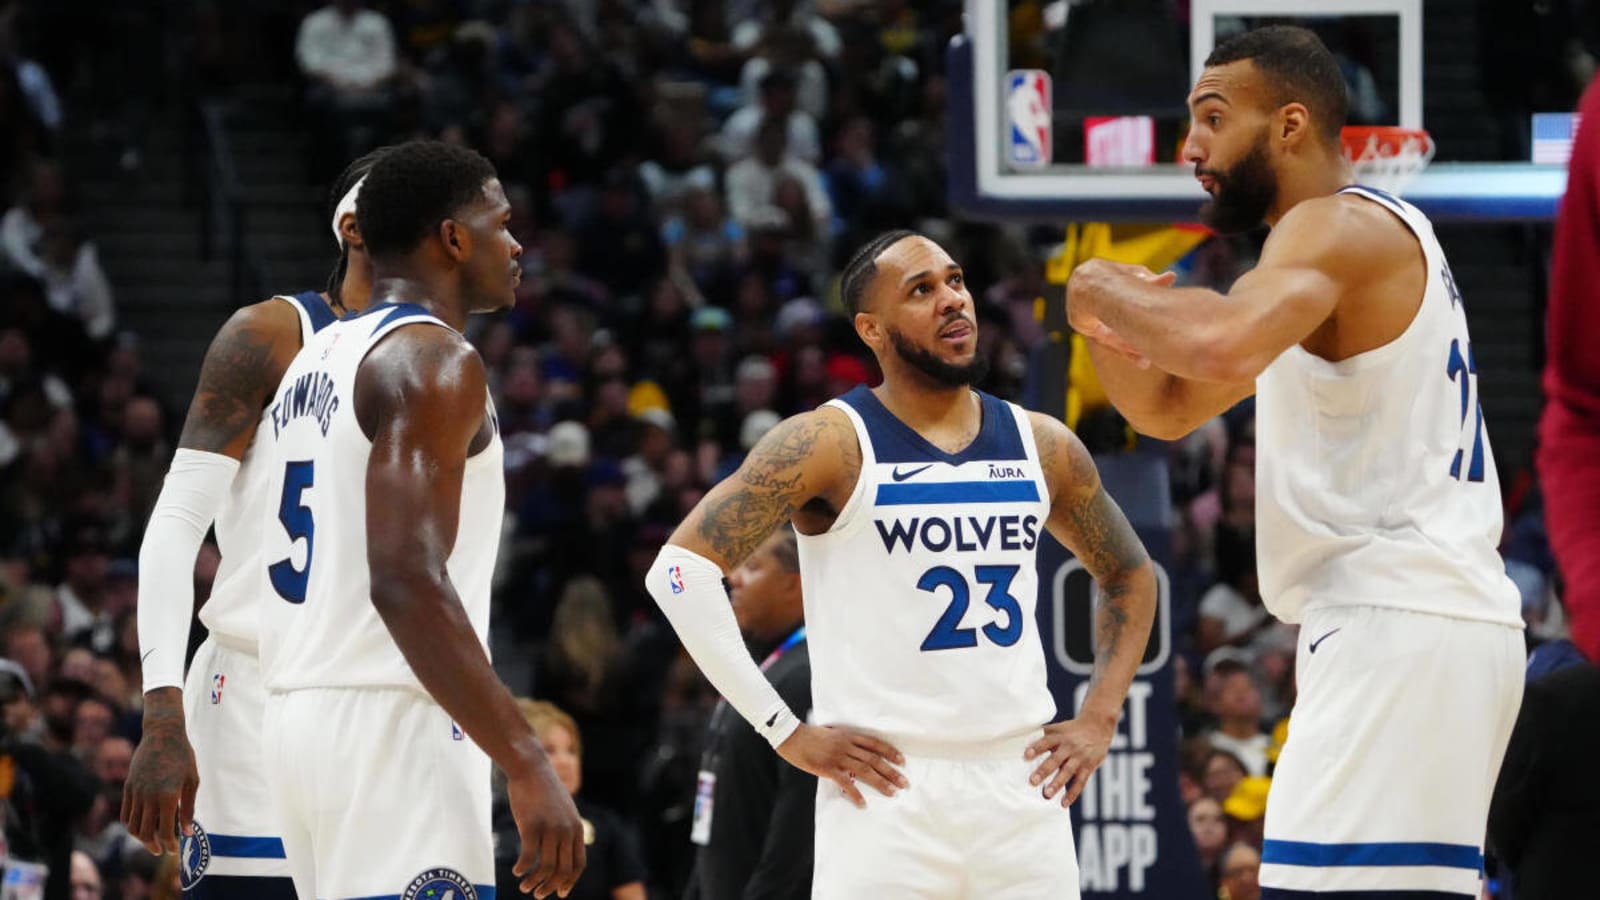 Kevin Garnett On Timberwolves After Game 2 Win: 'This Is The Defensive Version Of The Warriors'